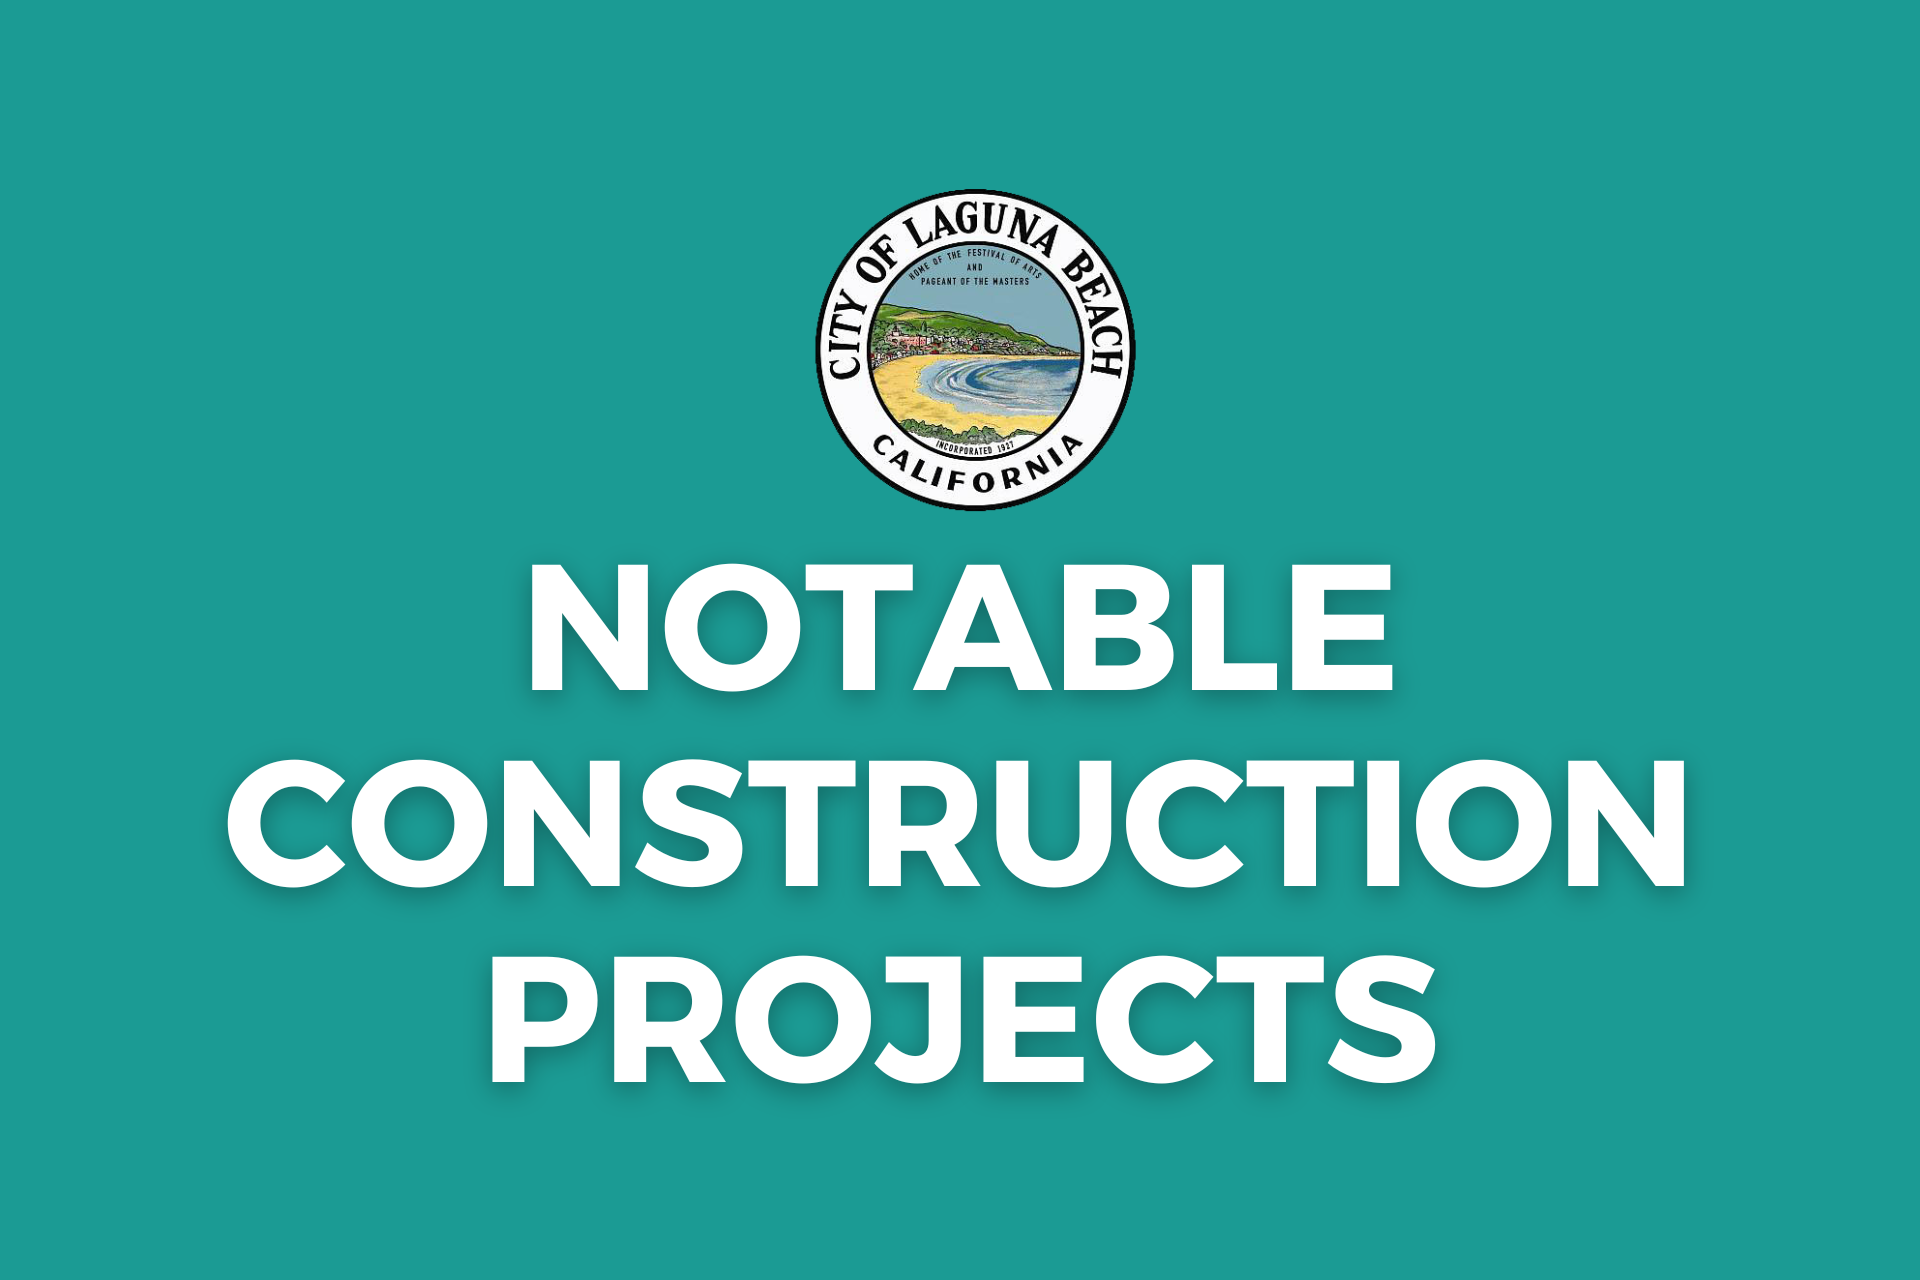 Current Construction Projects